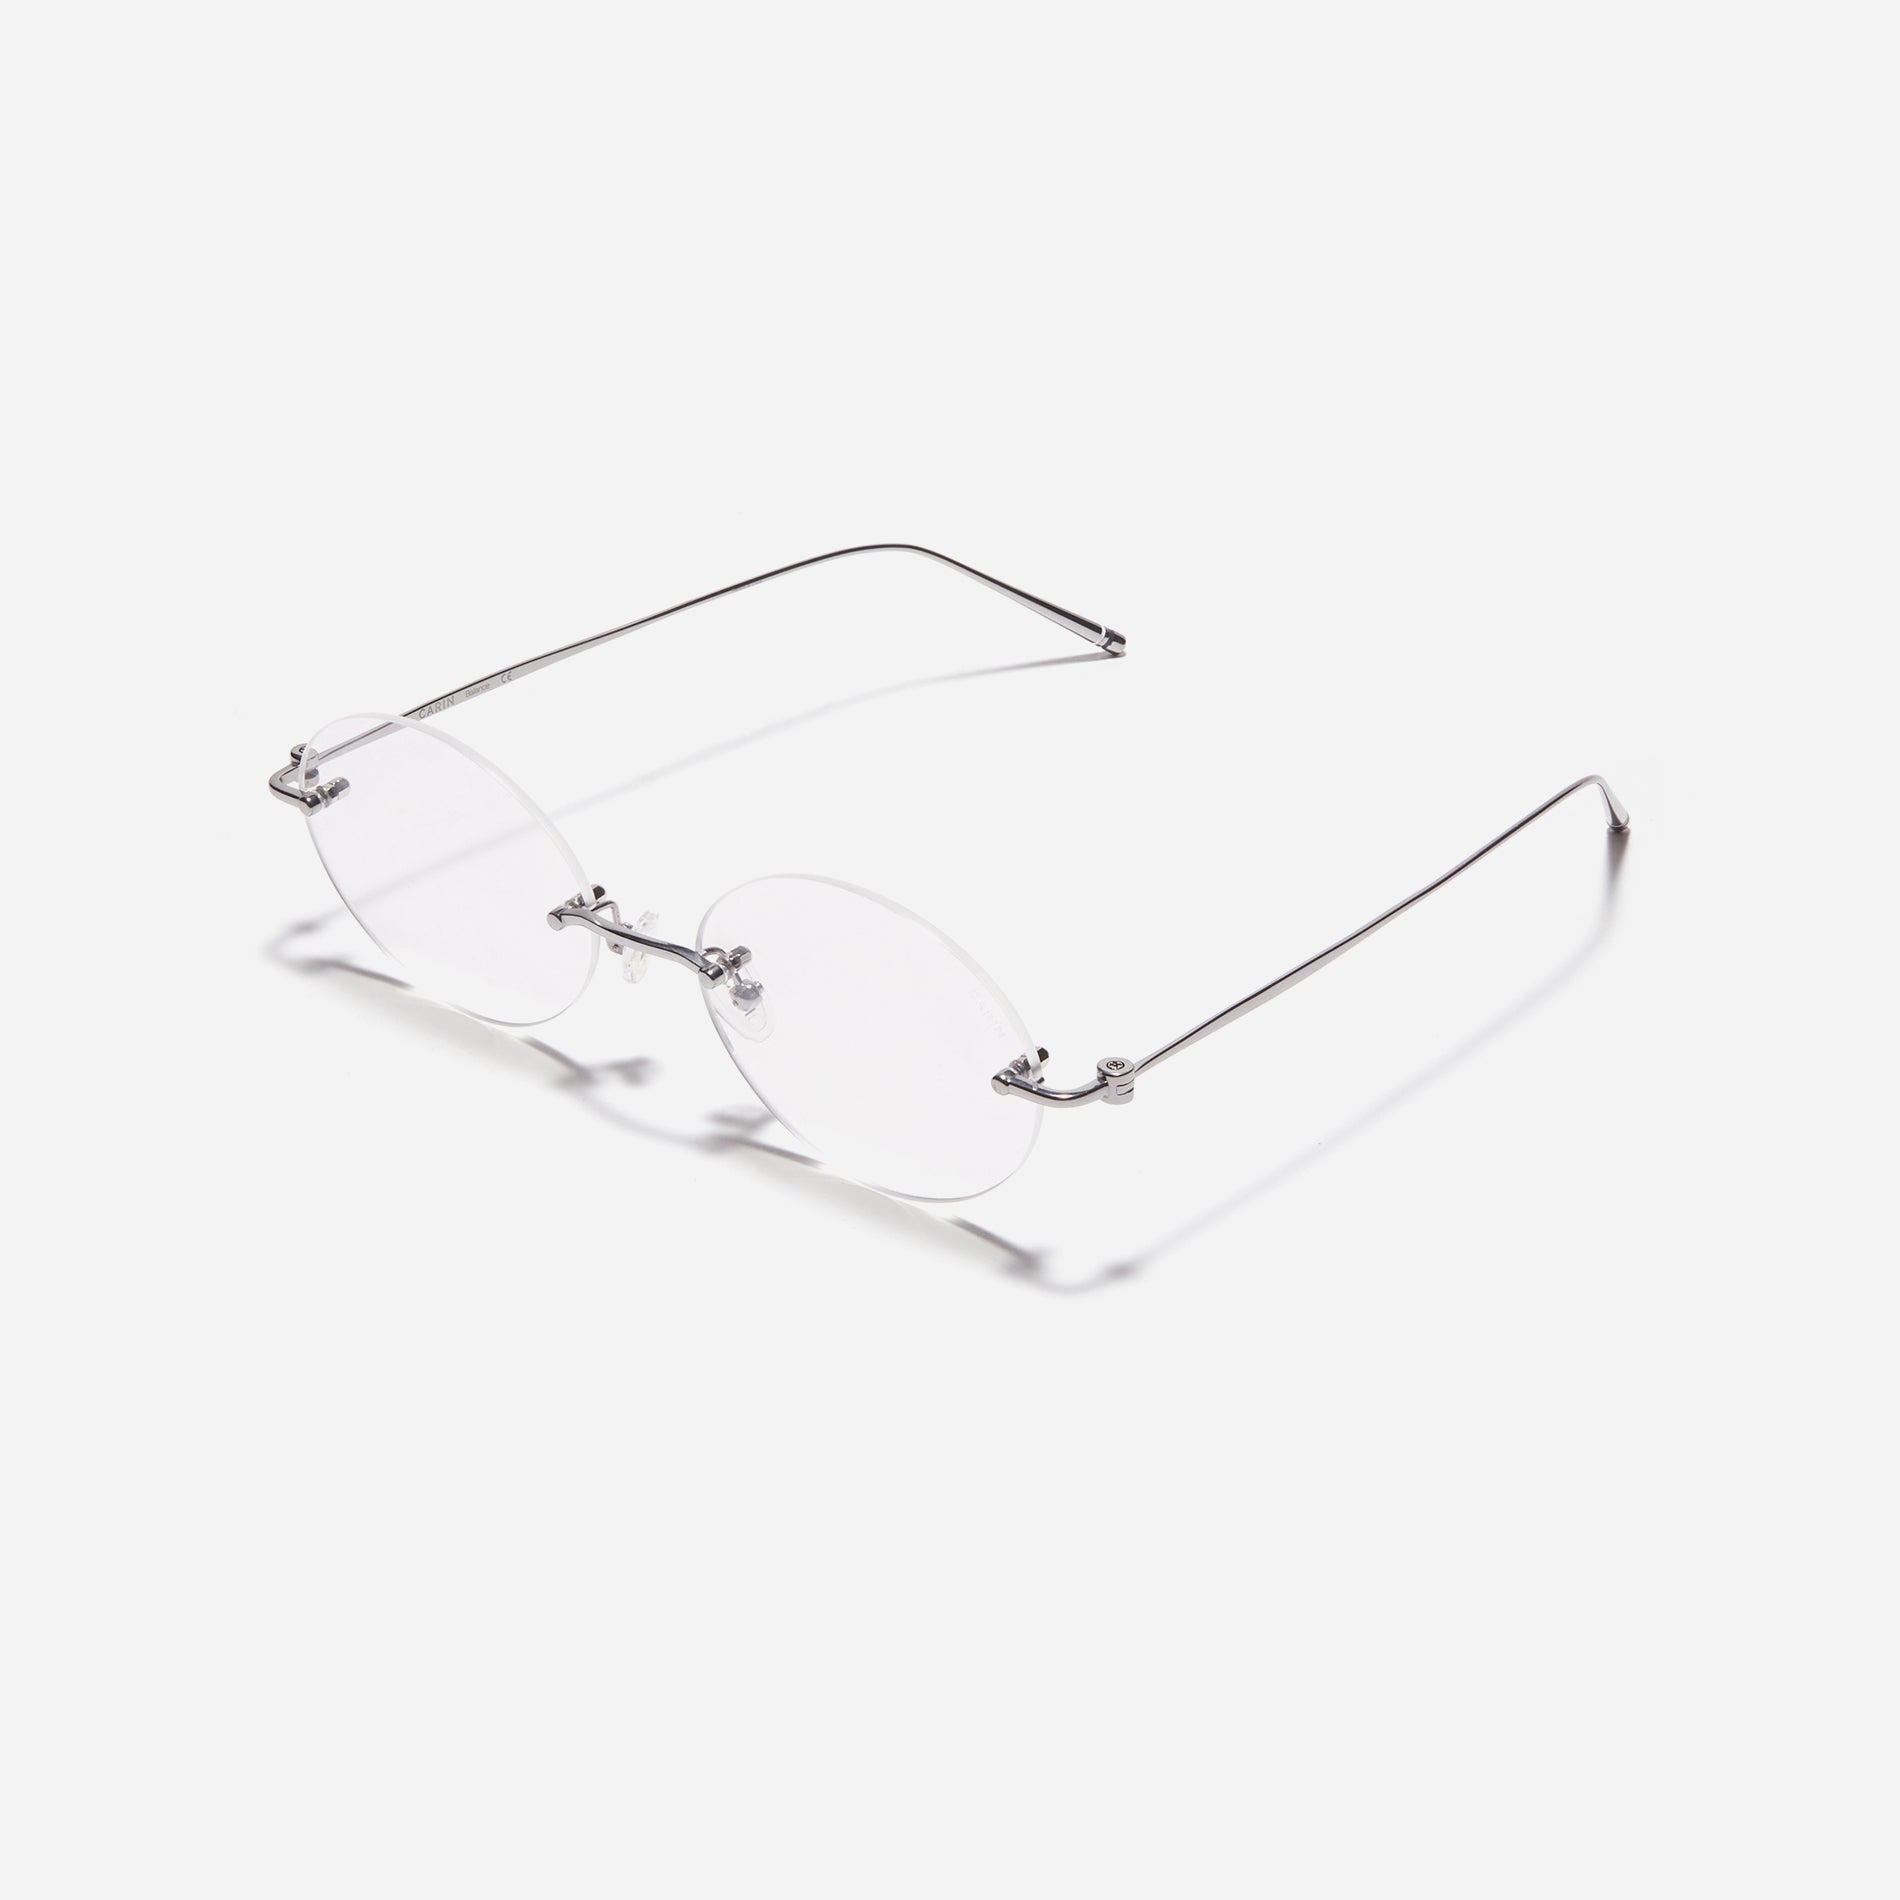  Rimless round-shaped retro eyeglasses. Featuring narrow rims and dual lining on the tips, these eyeglasses ensure a consistently comfortable fit and prevent slipping.